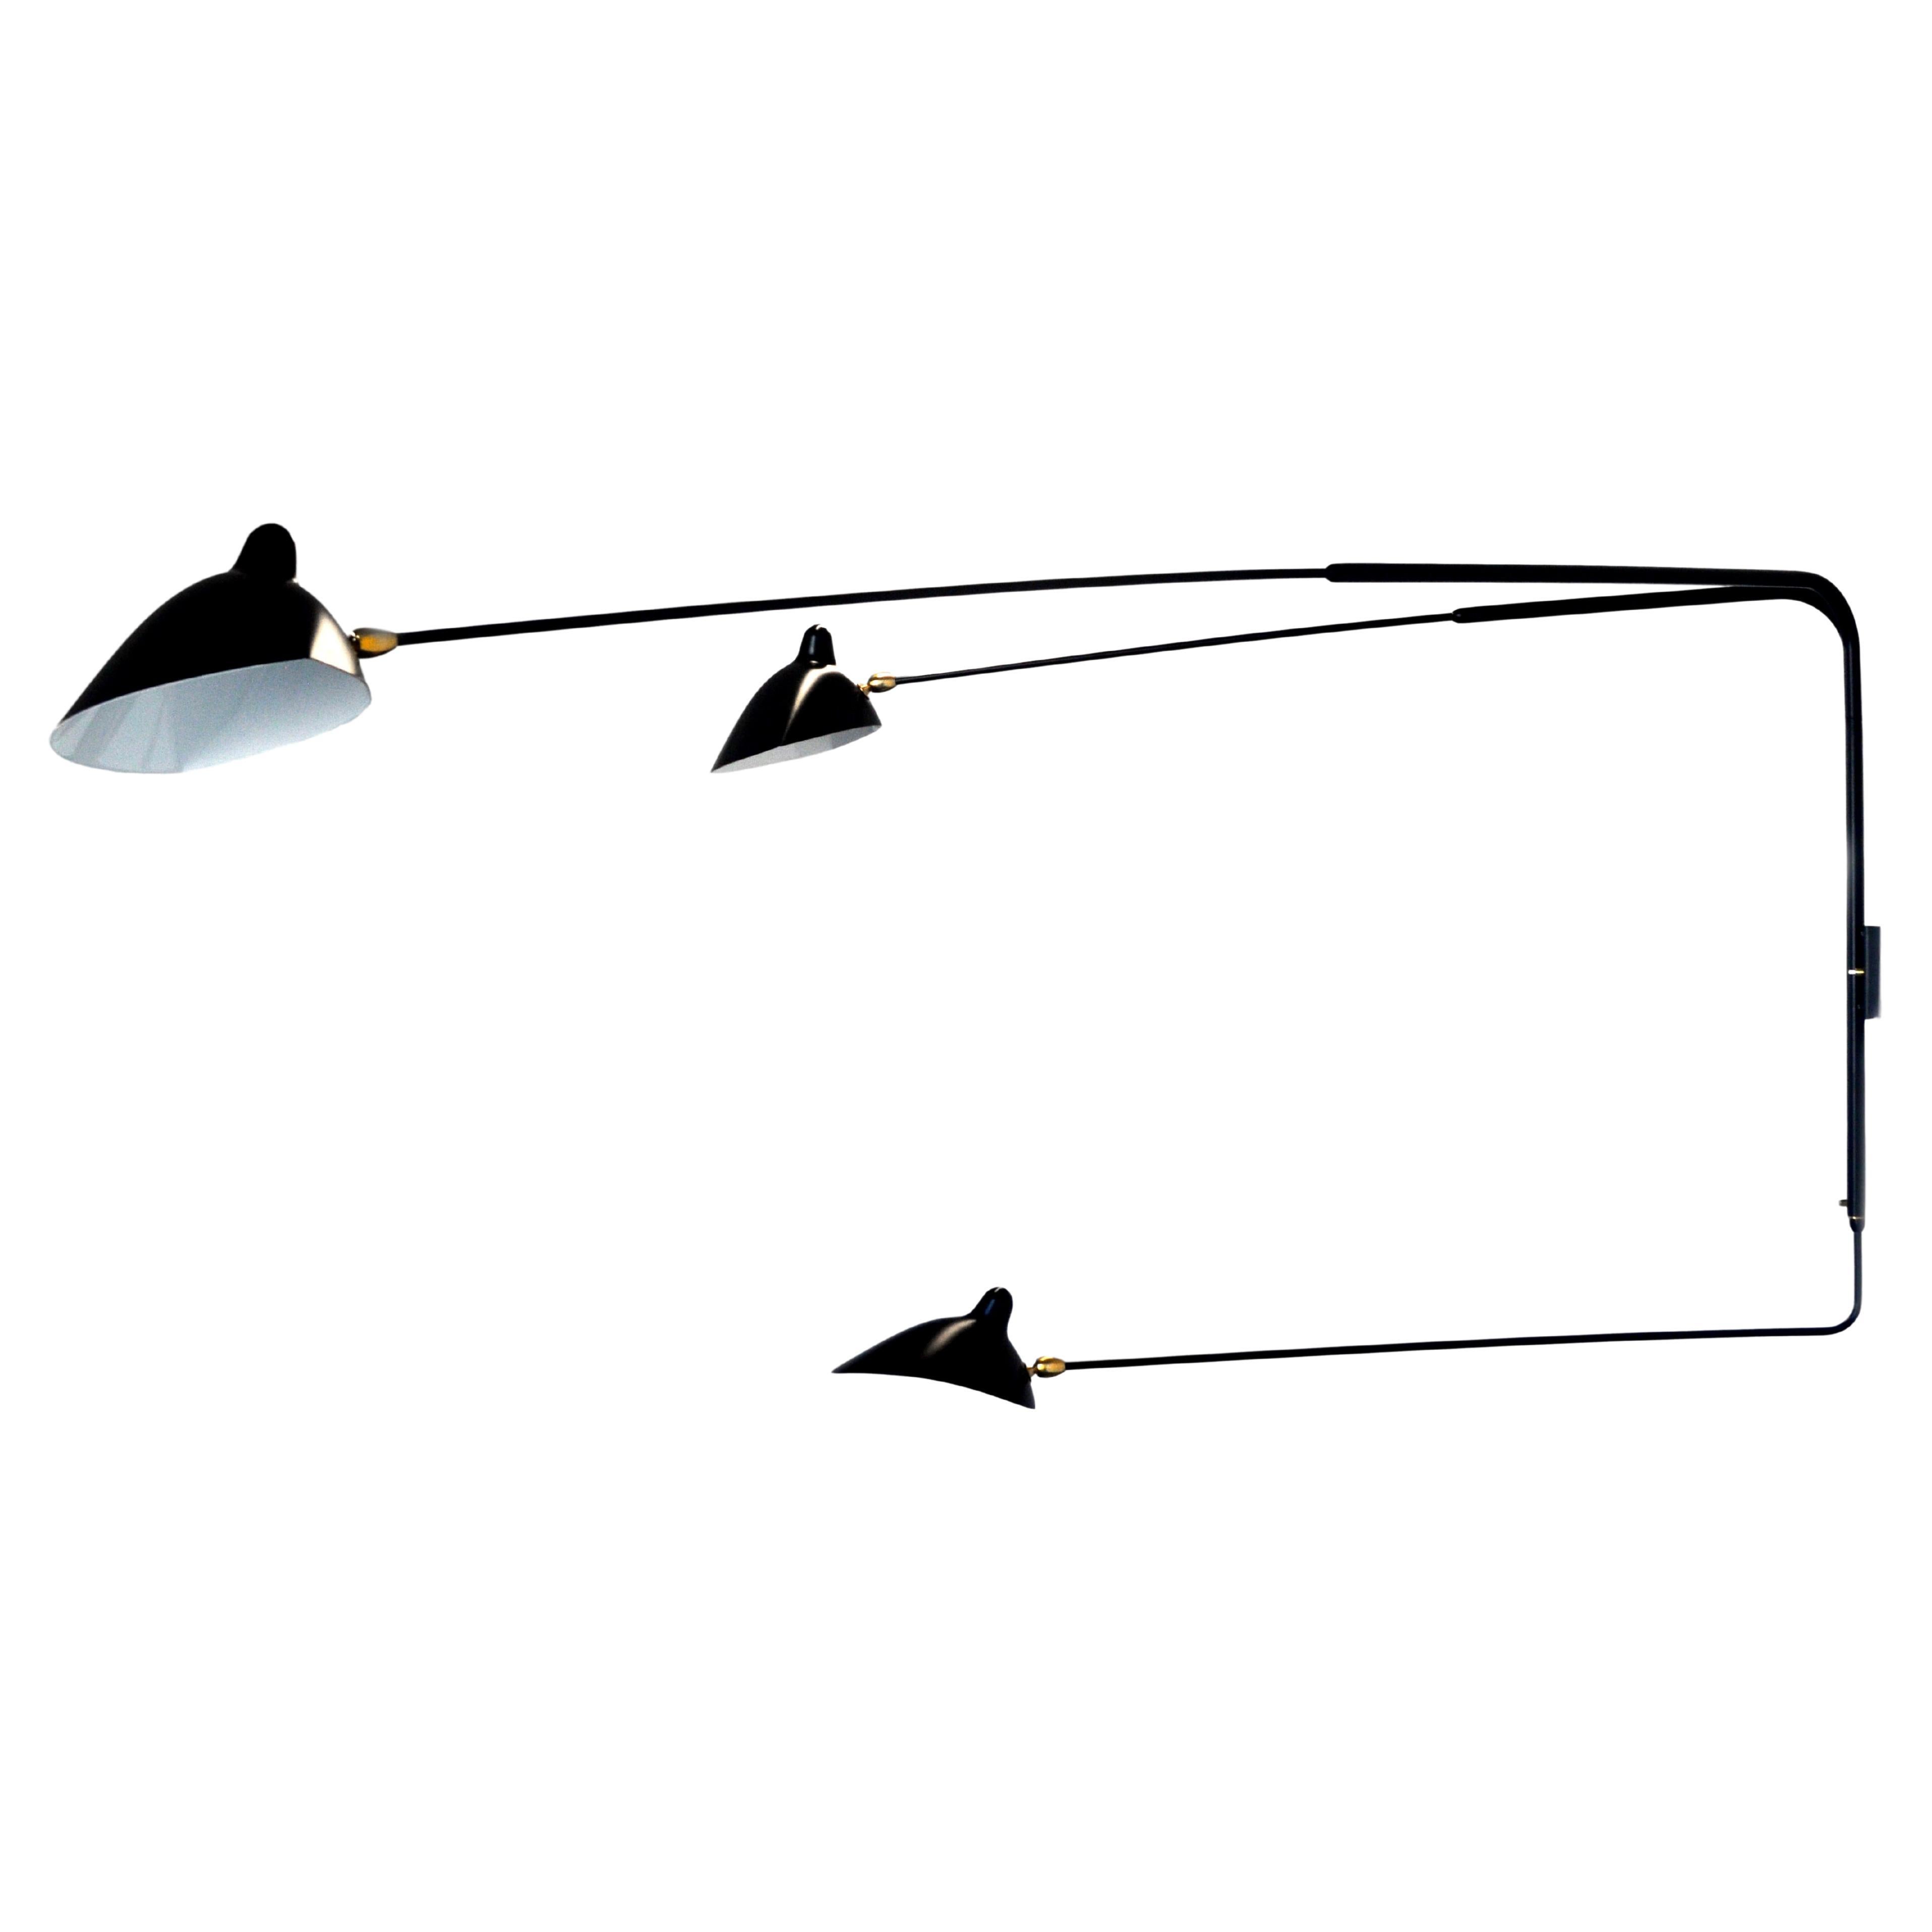 DESCRIPTION:
With arms measuring 52, 58 and 88 inches, this sconce can project light into a room at varying angles due to the independent rotation of each arm and each shade. Switches located on mounting plate. 32” h.

FEATURES:
2 Upper arms and